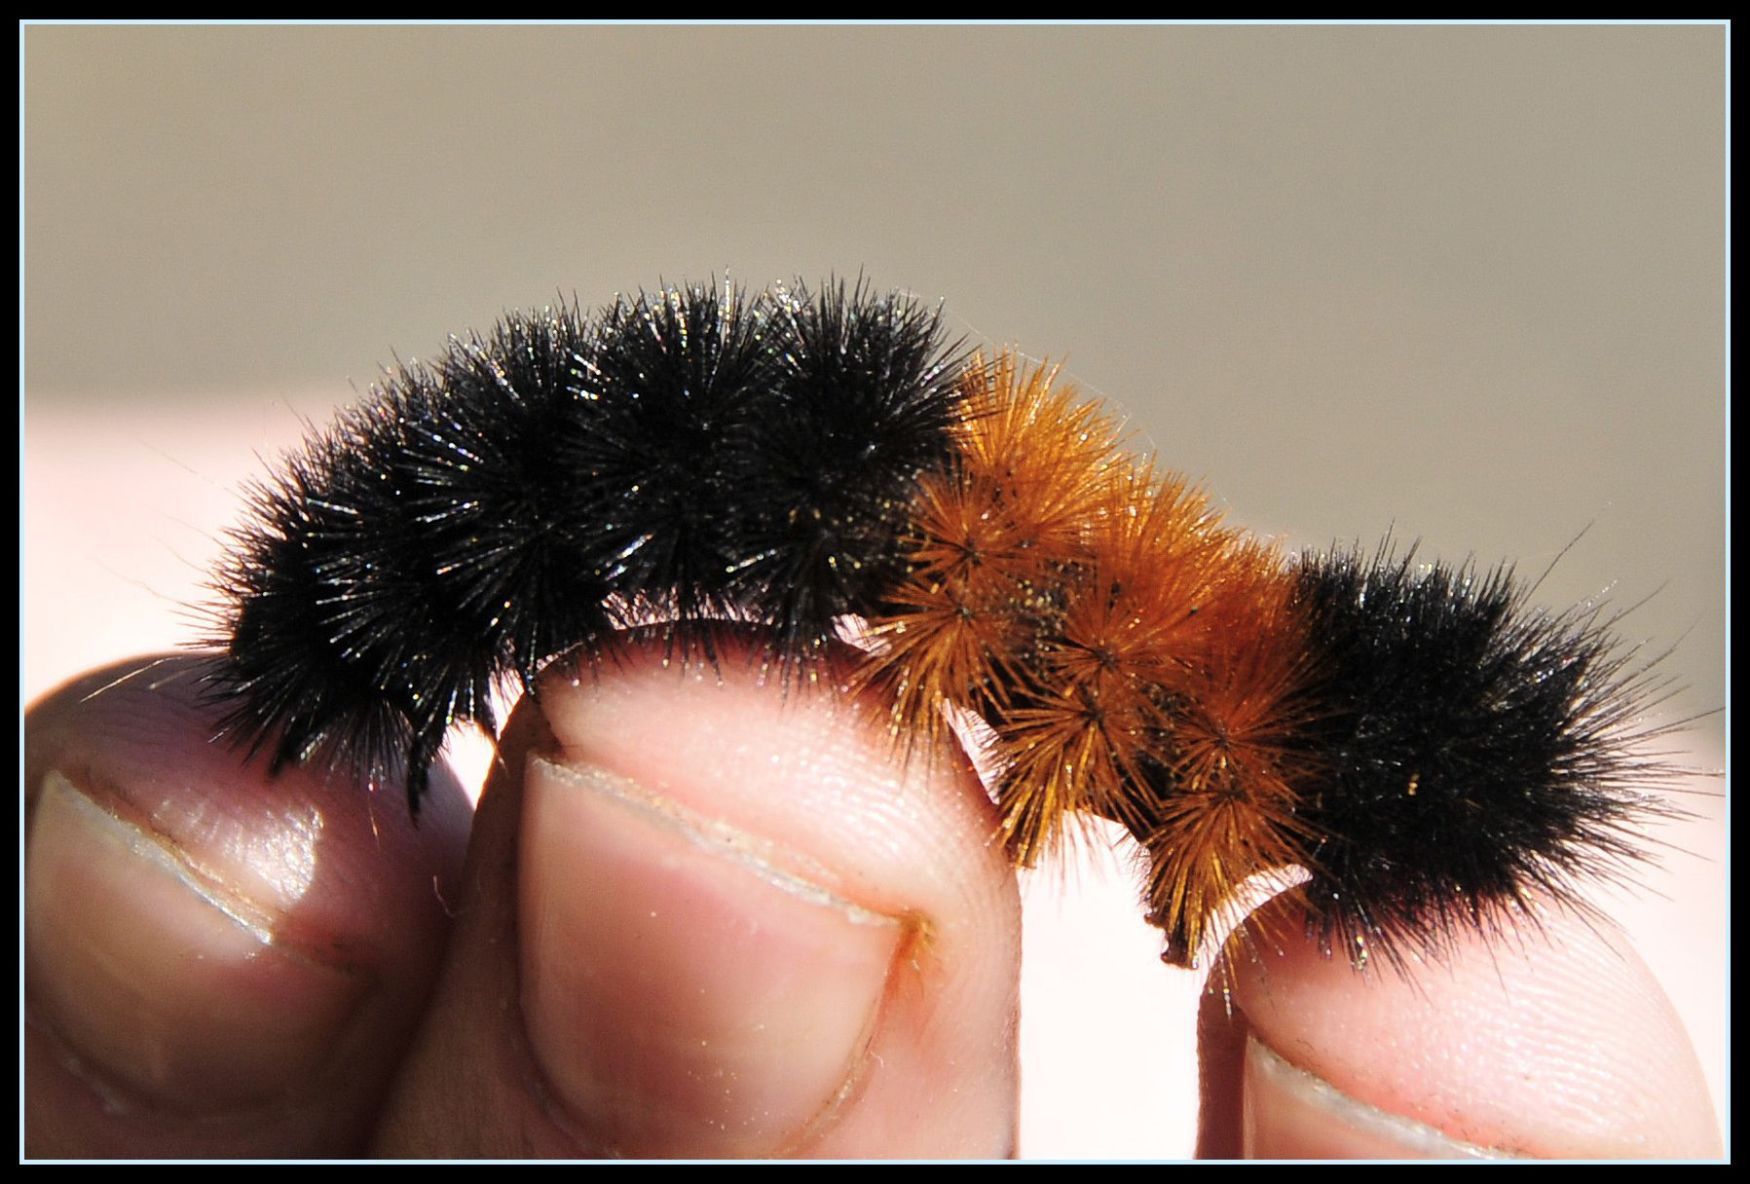 download woolly worm black